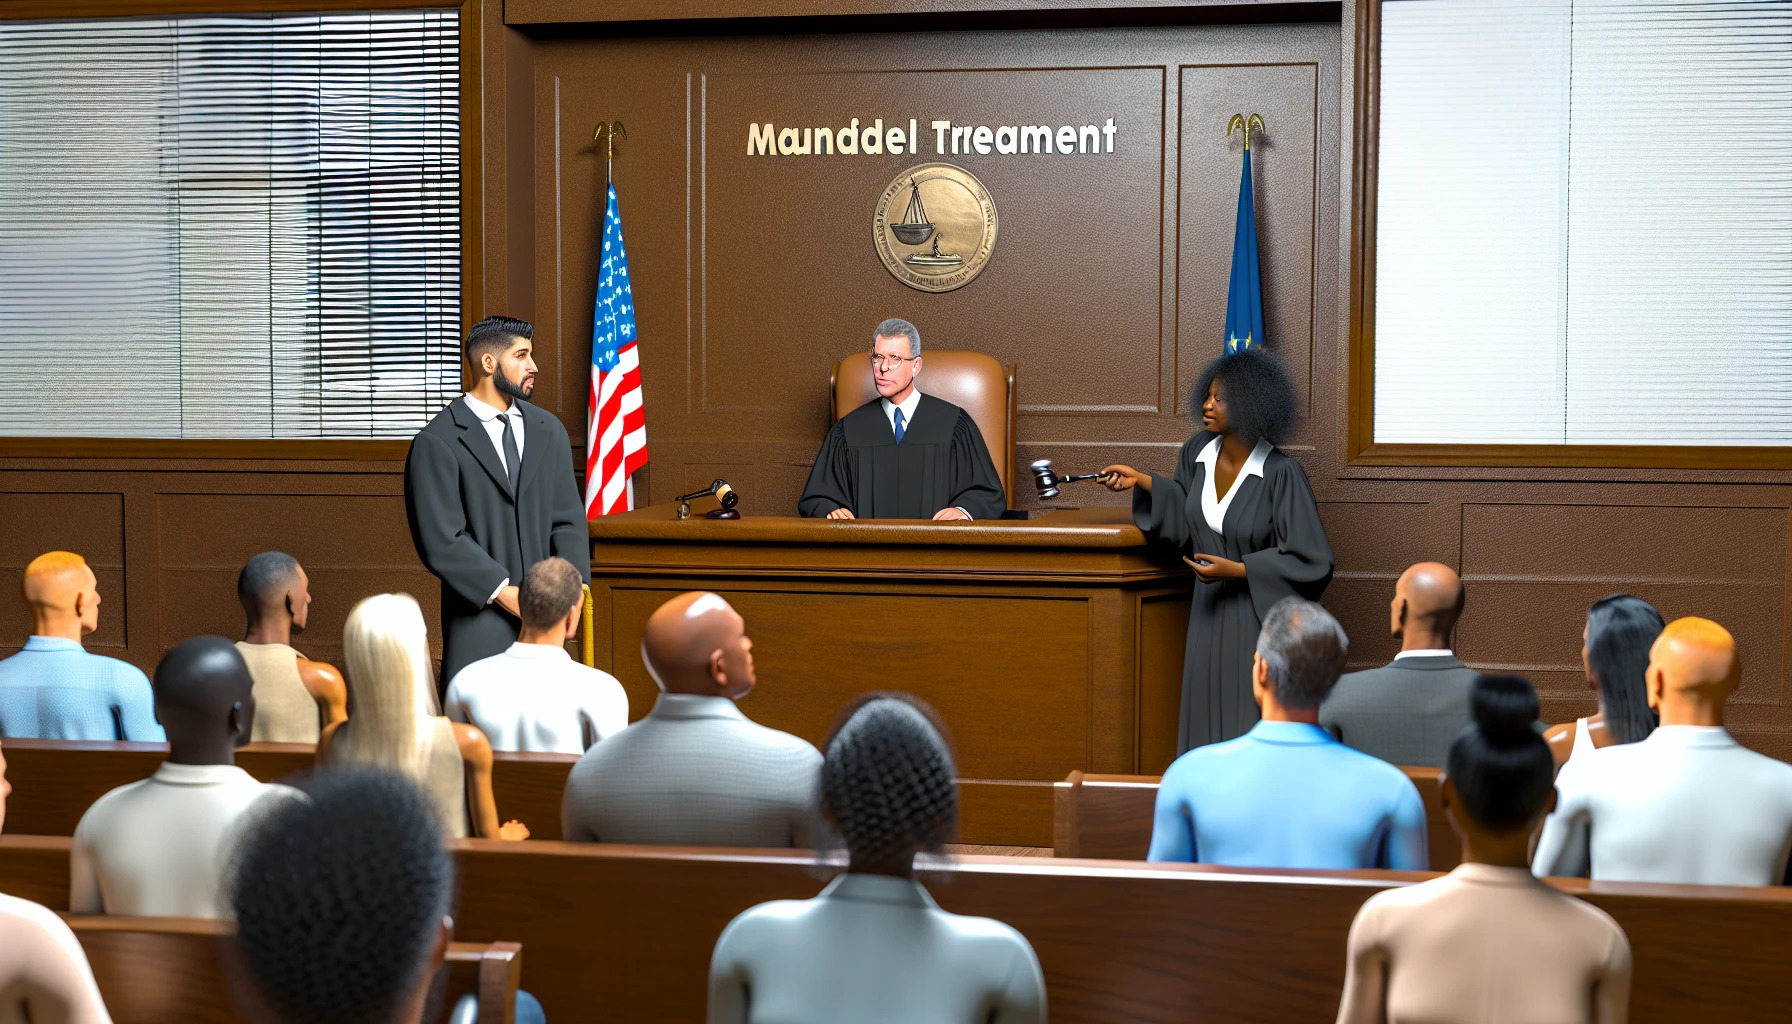 Image of a courtroom with a focus on mandated treatment programs and drug courts